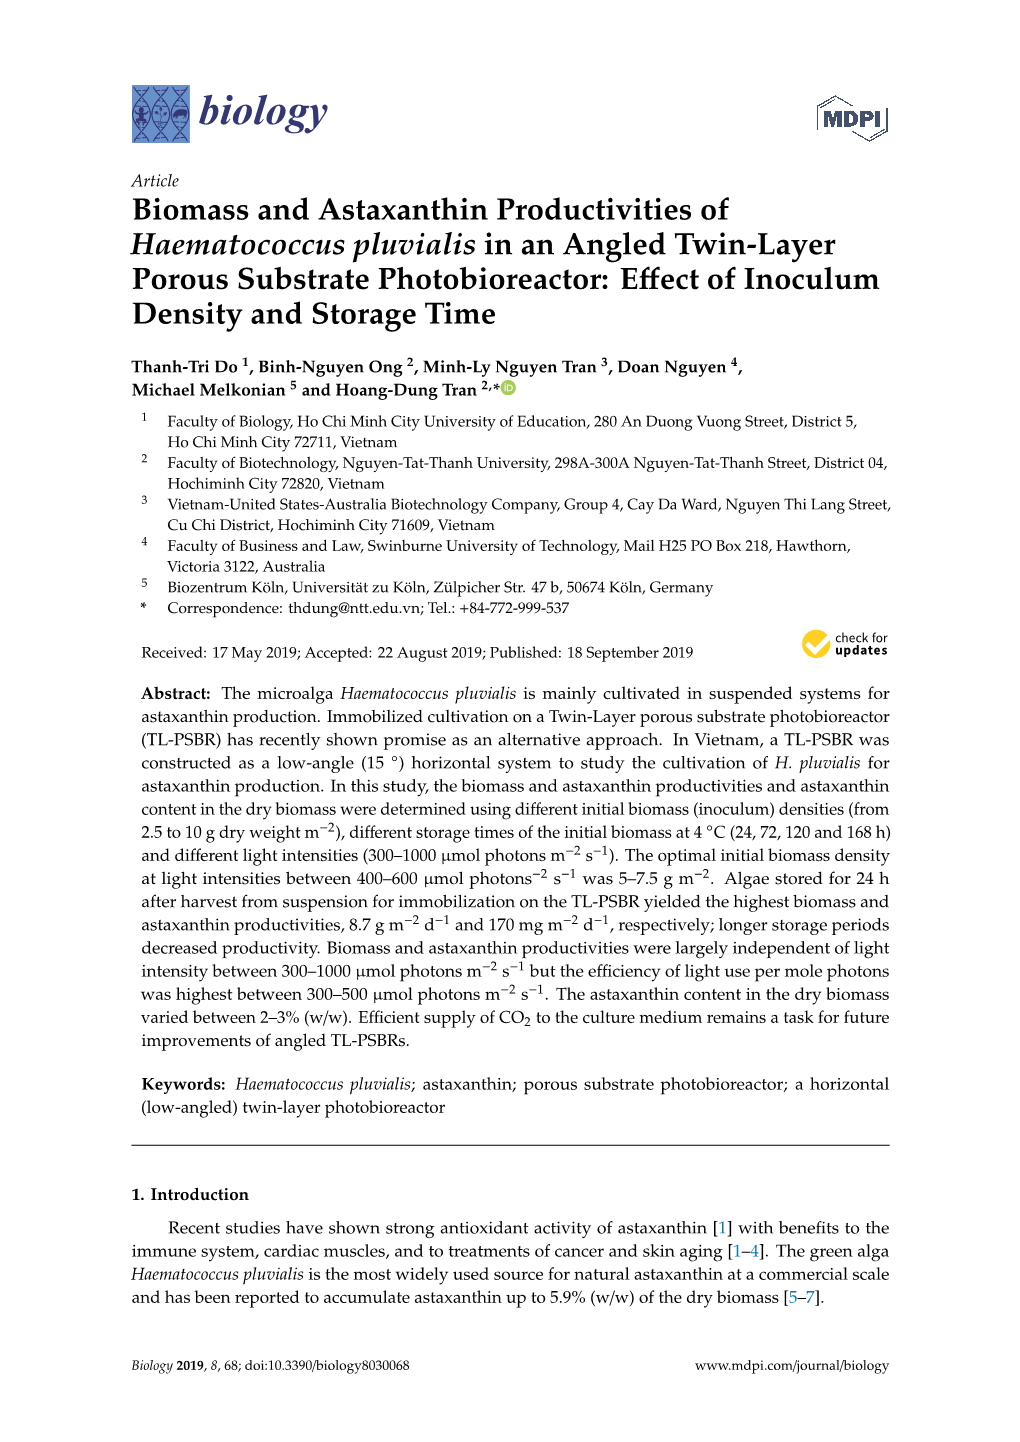 Biomass and Astaxanthin Productivities of Haematococcus Pluvialis in an Angled Twin-Layer Porous Substrate Photobioreactor: Eﬀect of Inoculum Density and Storage Time